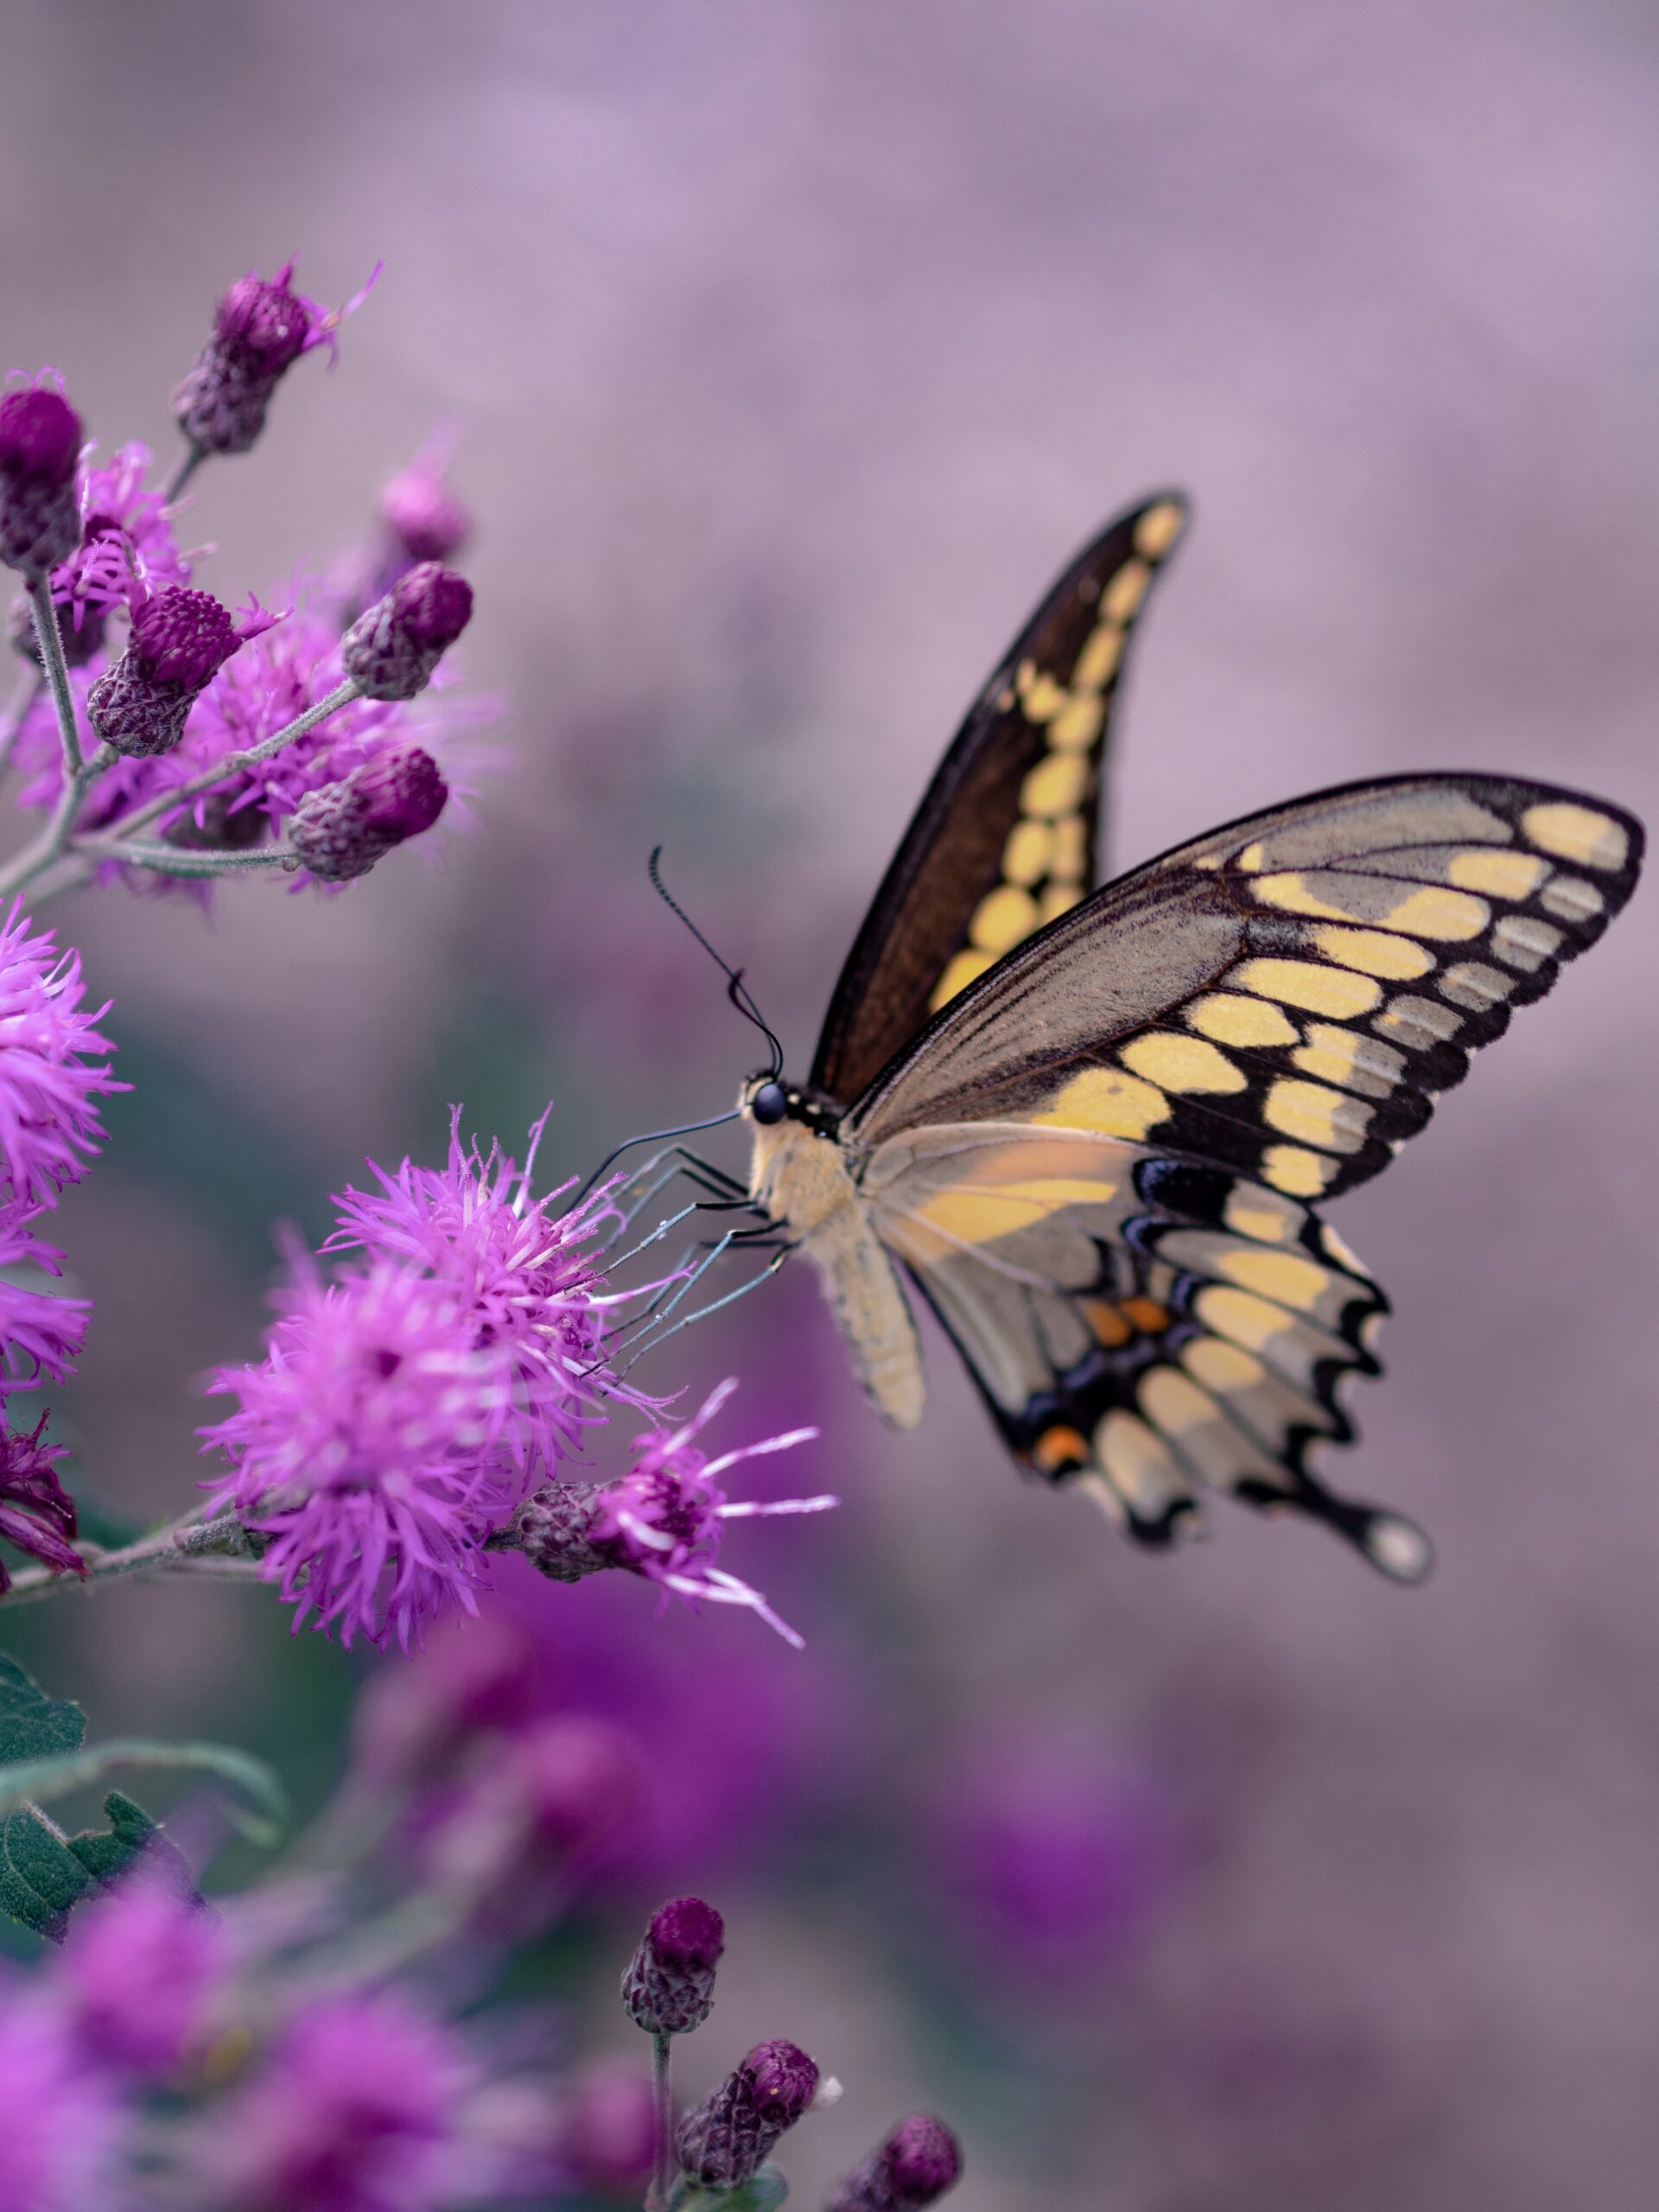 The Butterfly Effect – How One New Habit Can Lead to Big Changes